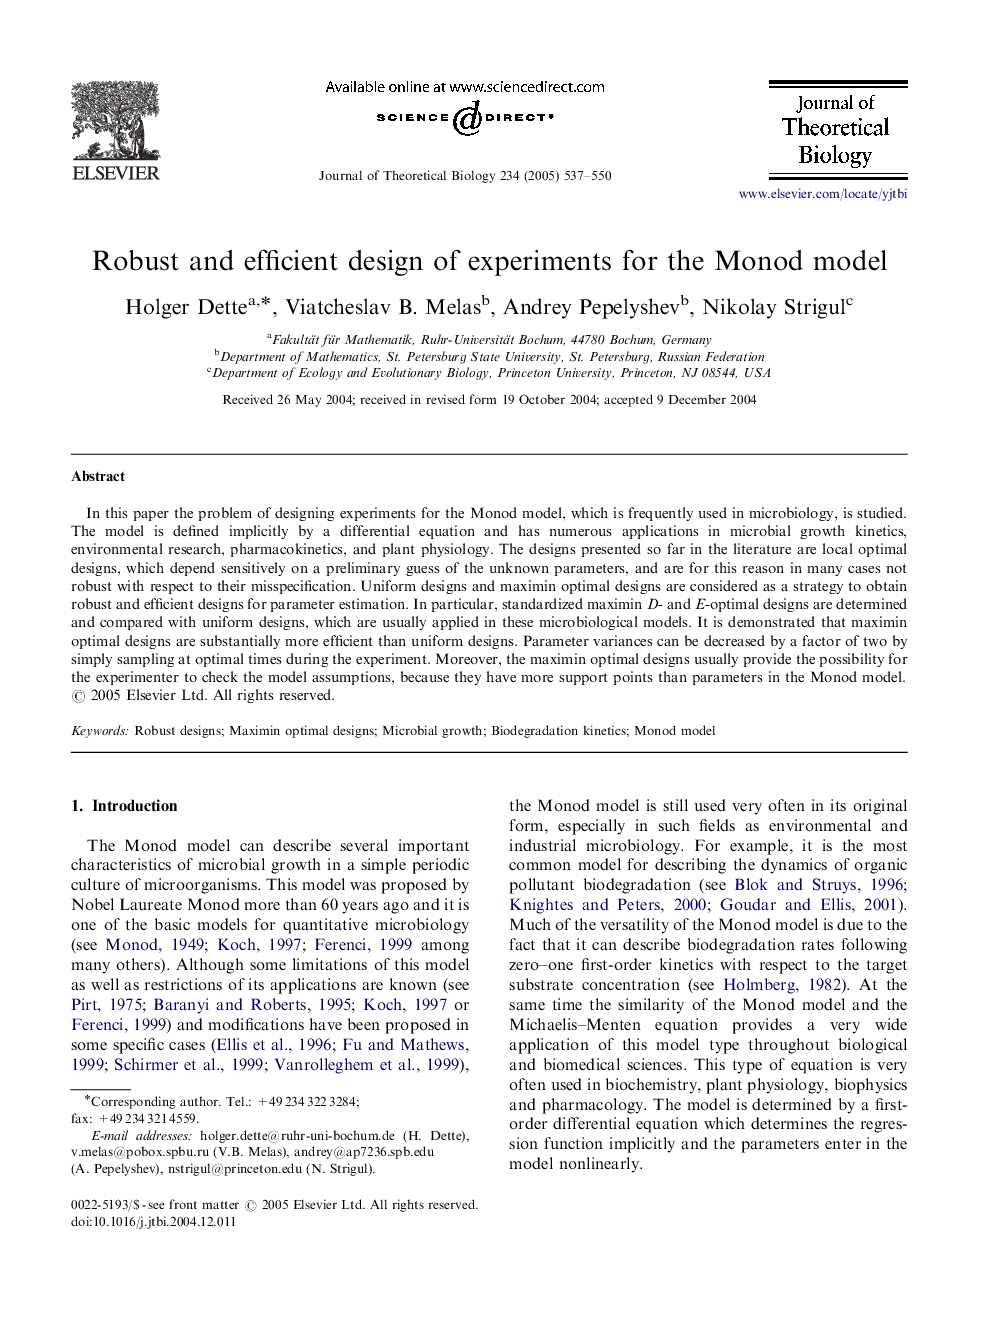 Robust and efficient design of experiments for the Monod model